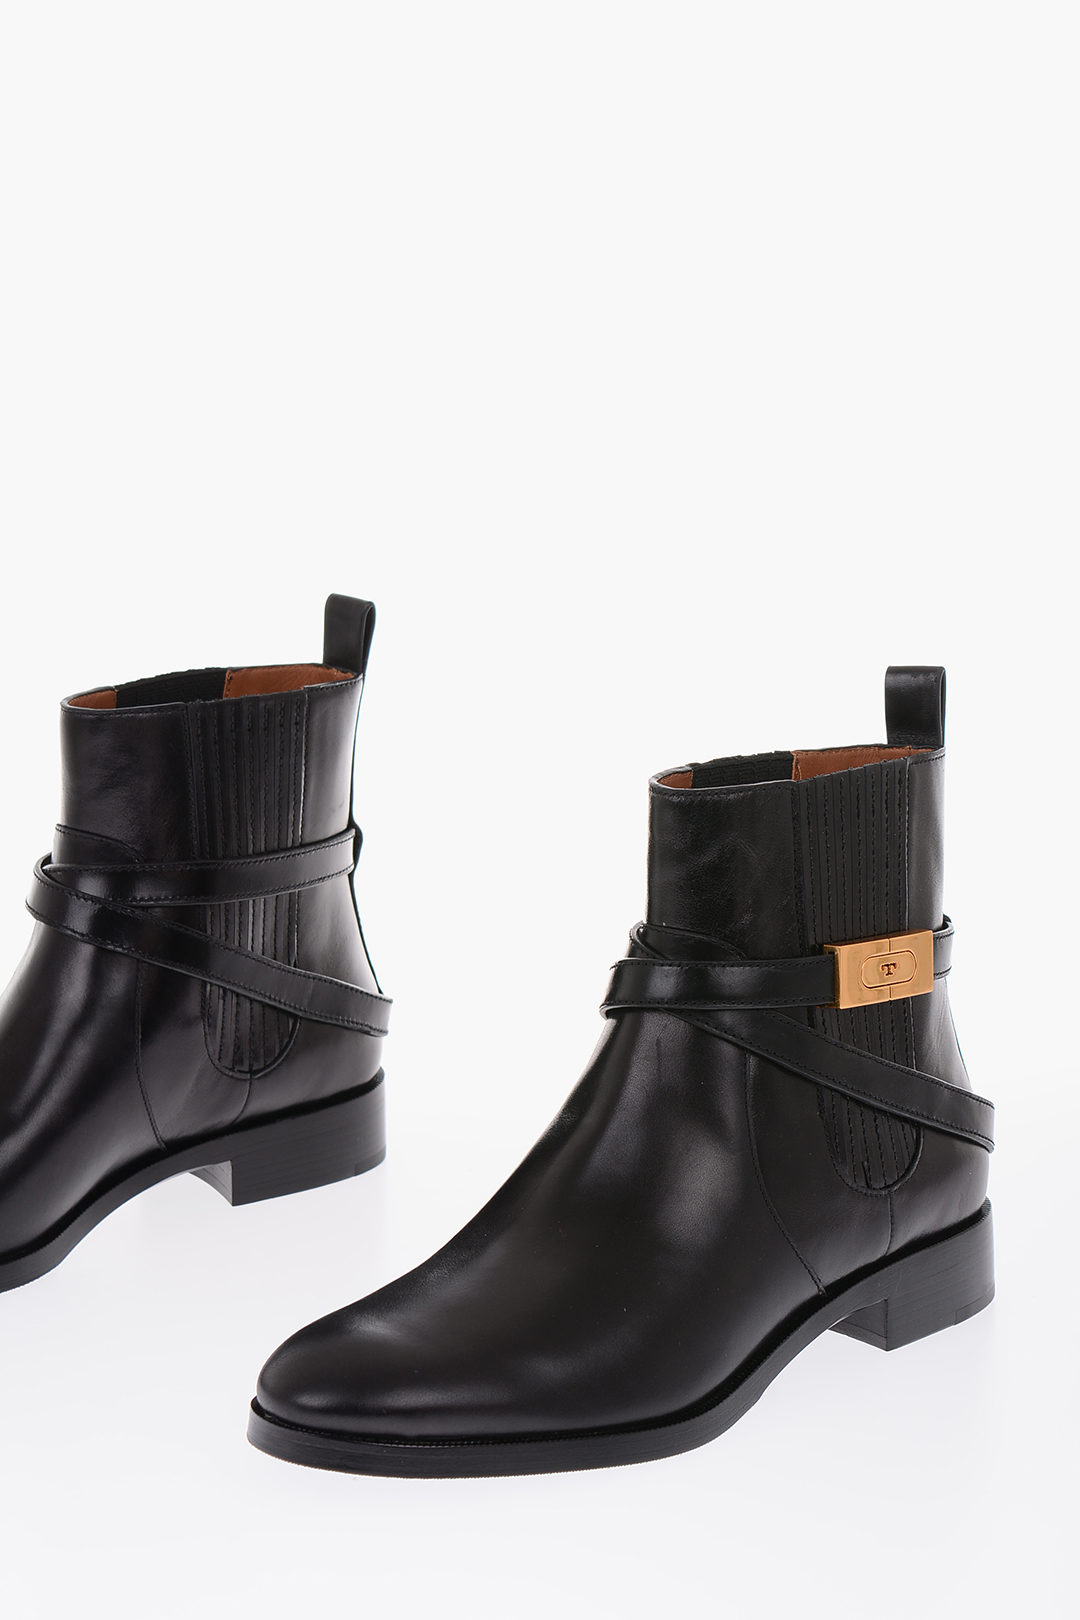 Tory Burch leather SIERRA Chelsea boots women - Glamood Outlet